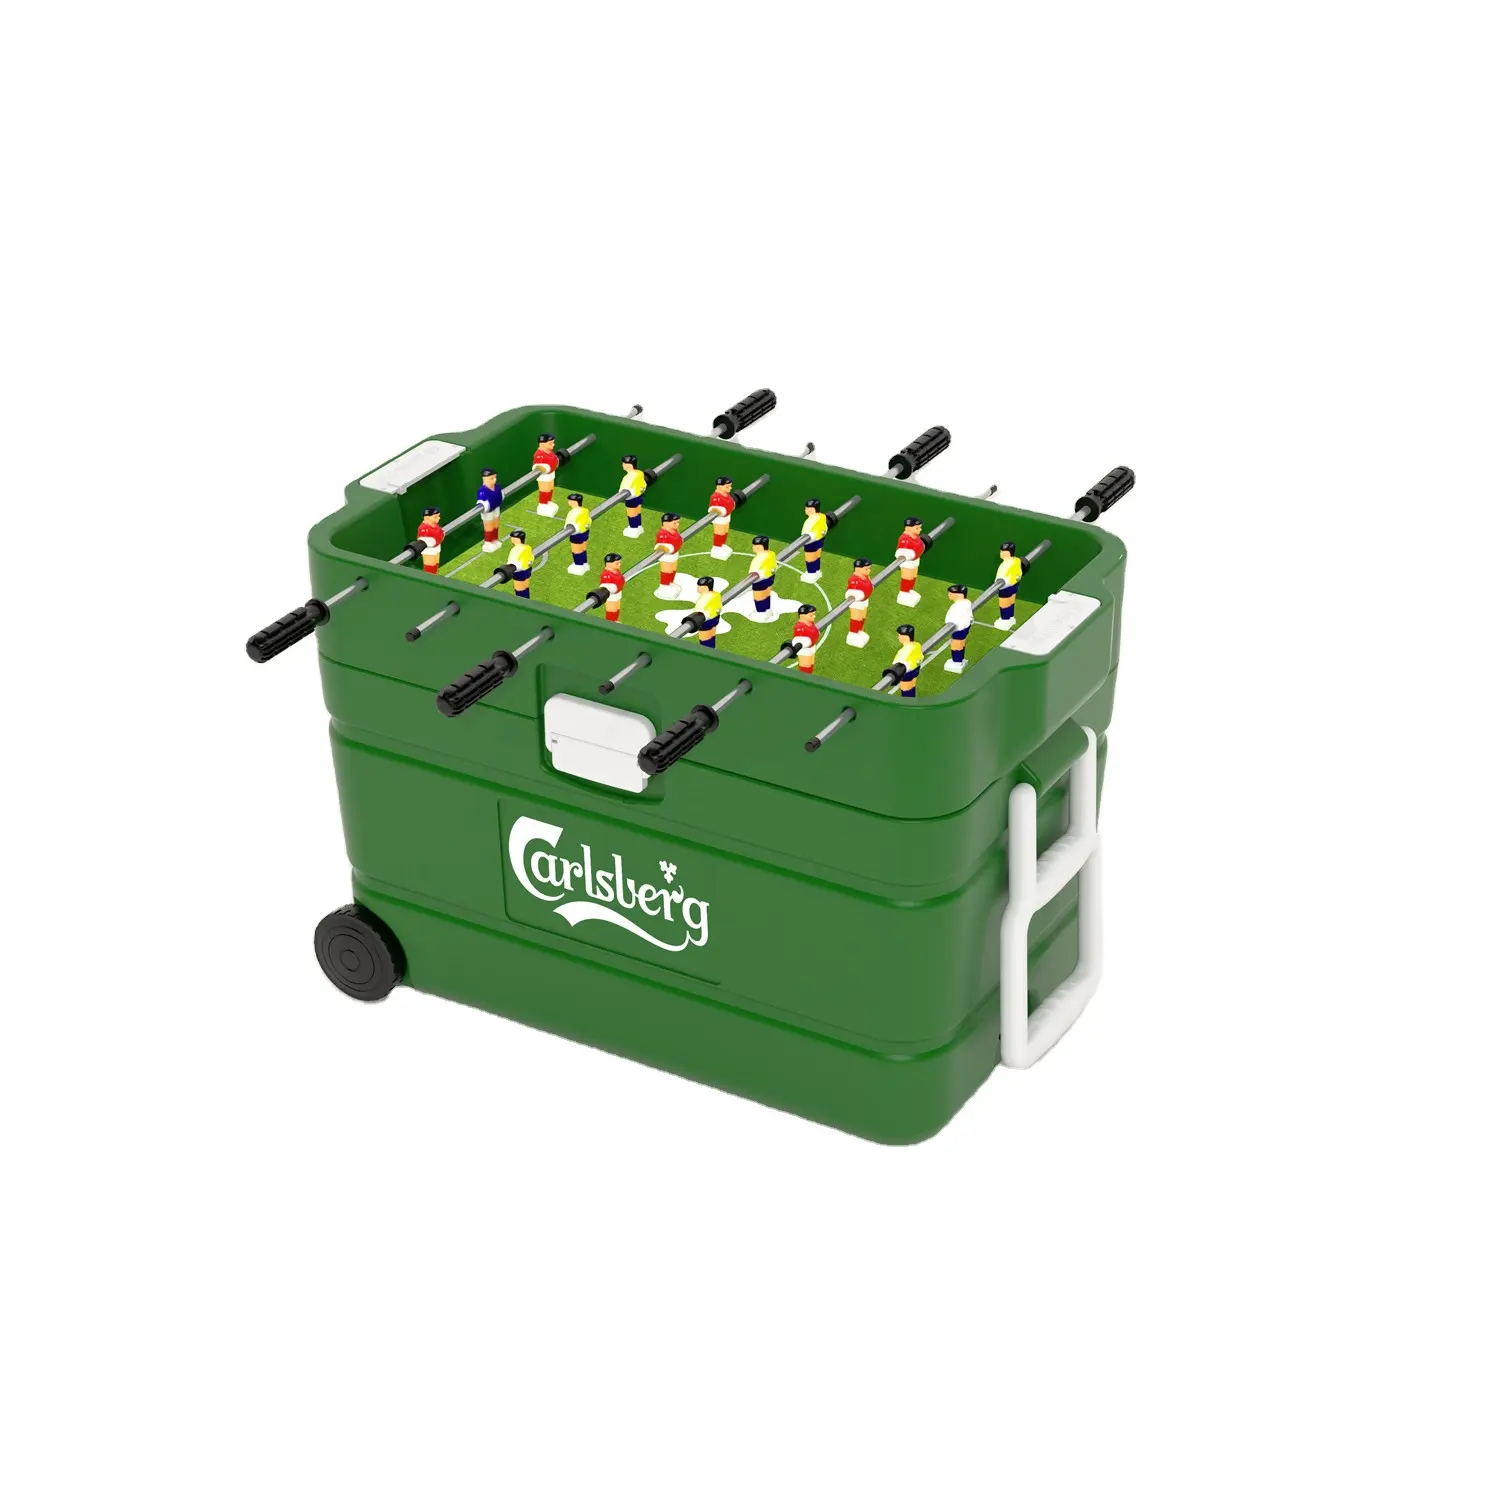 100% Eco-friendly Wheeled cooler box with football table game ideal for camping trips, tailgating parties, and picnics